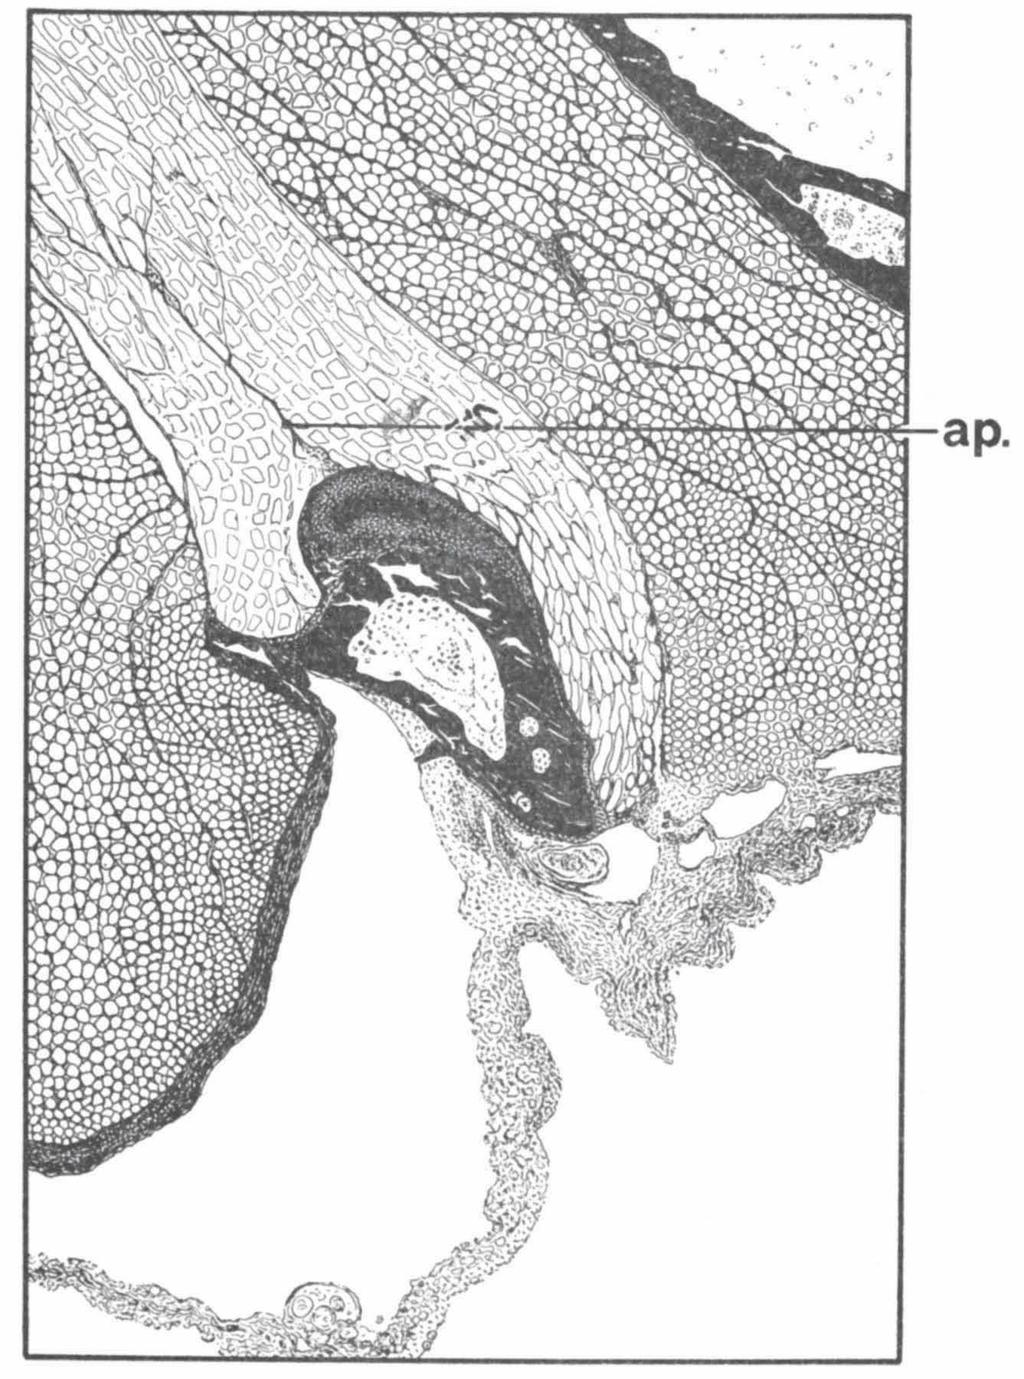 DULLEMEIJER & POVEL, RATTLESNAKES 567 Fig. íe. Microscopic cross-section through the right ectopterygoid-pterygoid articulation in Crotalus viridis helleri. ap., aponeurosis. and the pterygoid.